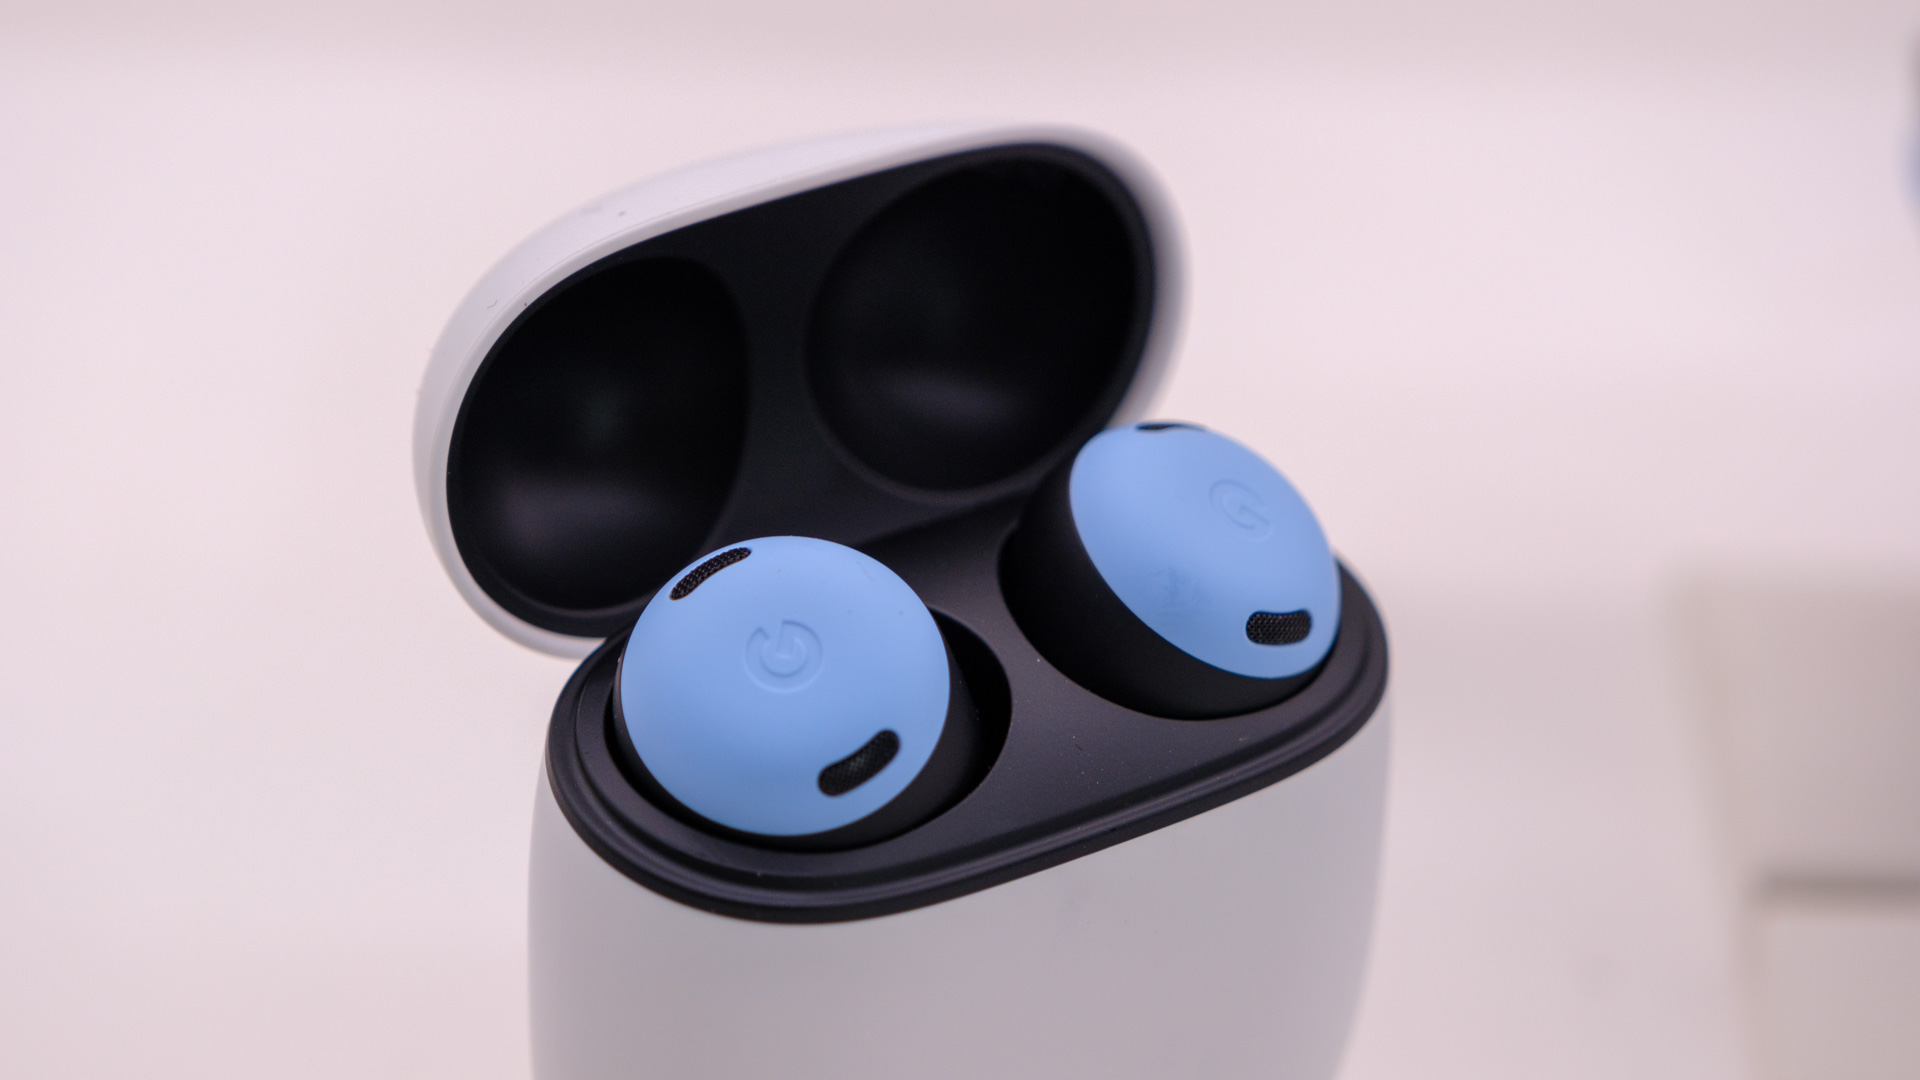 Pixel Buds Pro get two new colors and new features in latest update